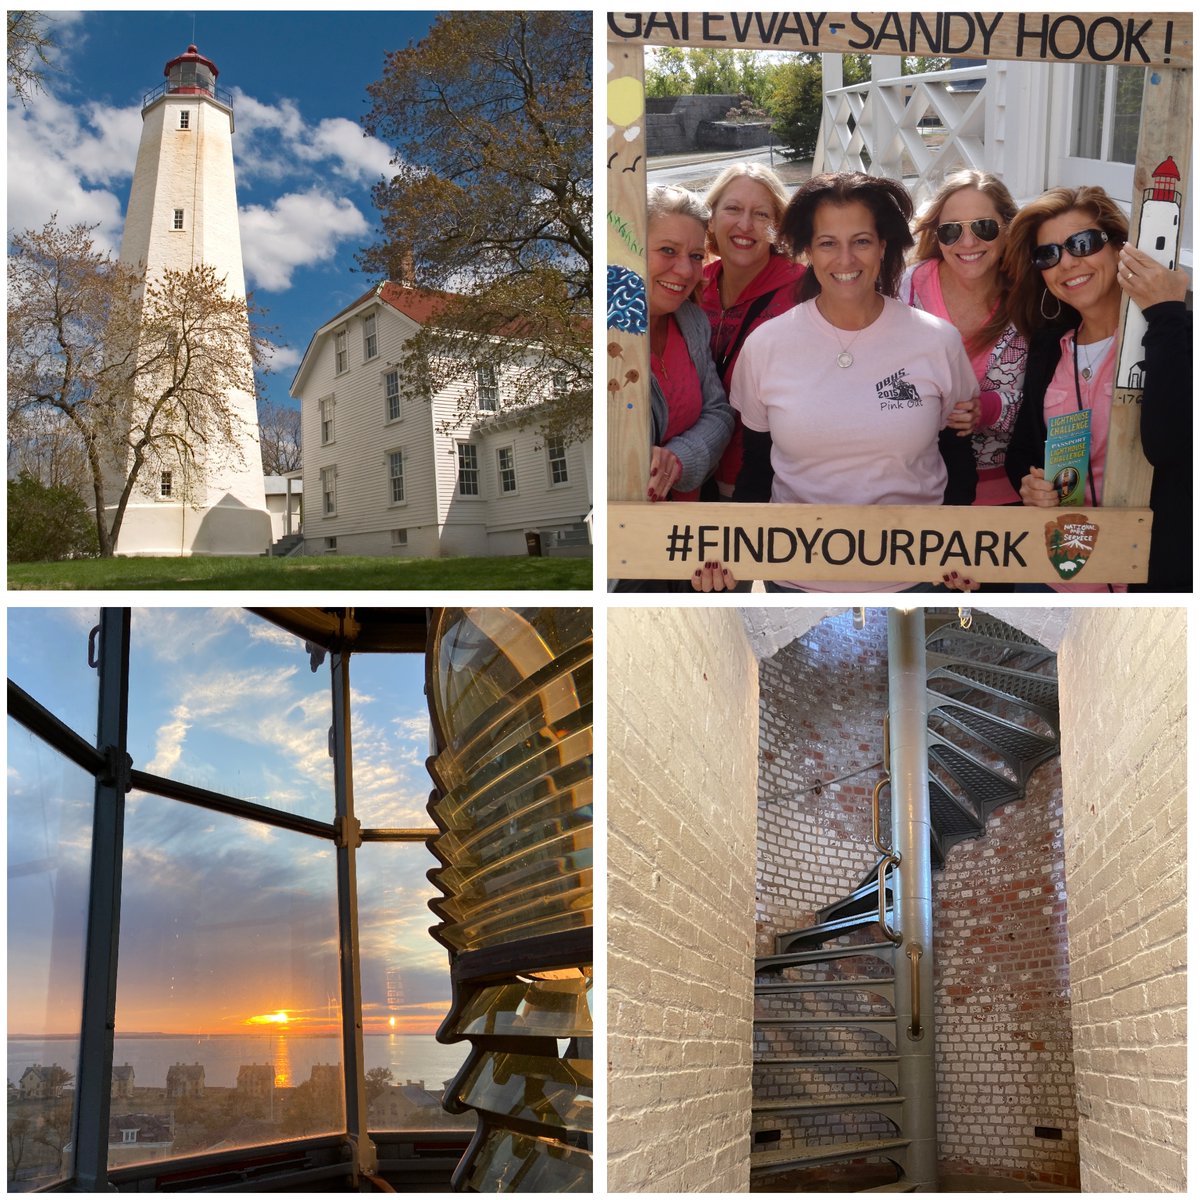 The Lighthouse Challenge of NJ starts this Saturday! Add the Sandy Hook Lighthouse to your list of lighthouses to visit this weekend! Sign up at: lighthousechallengenj.com!